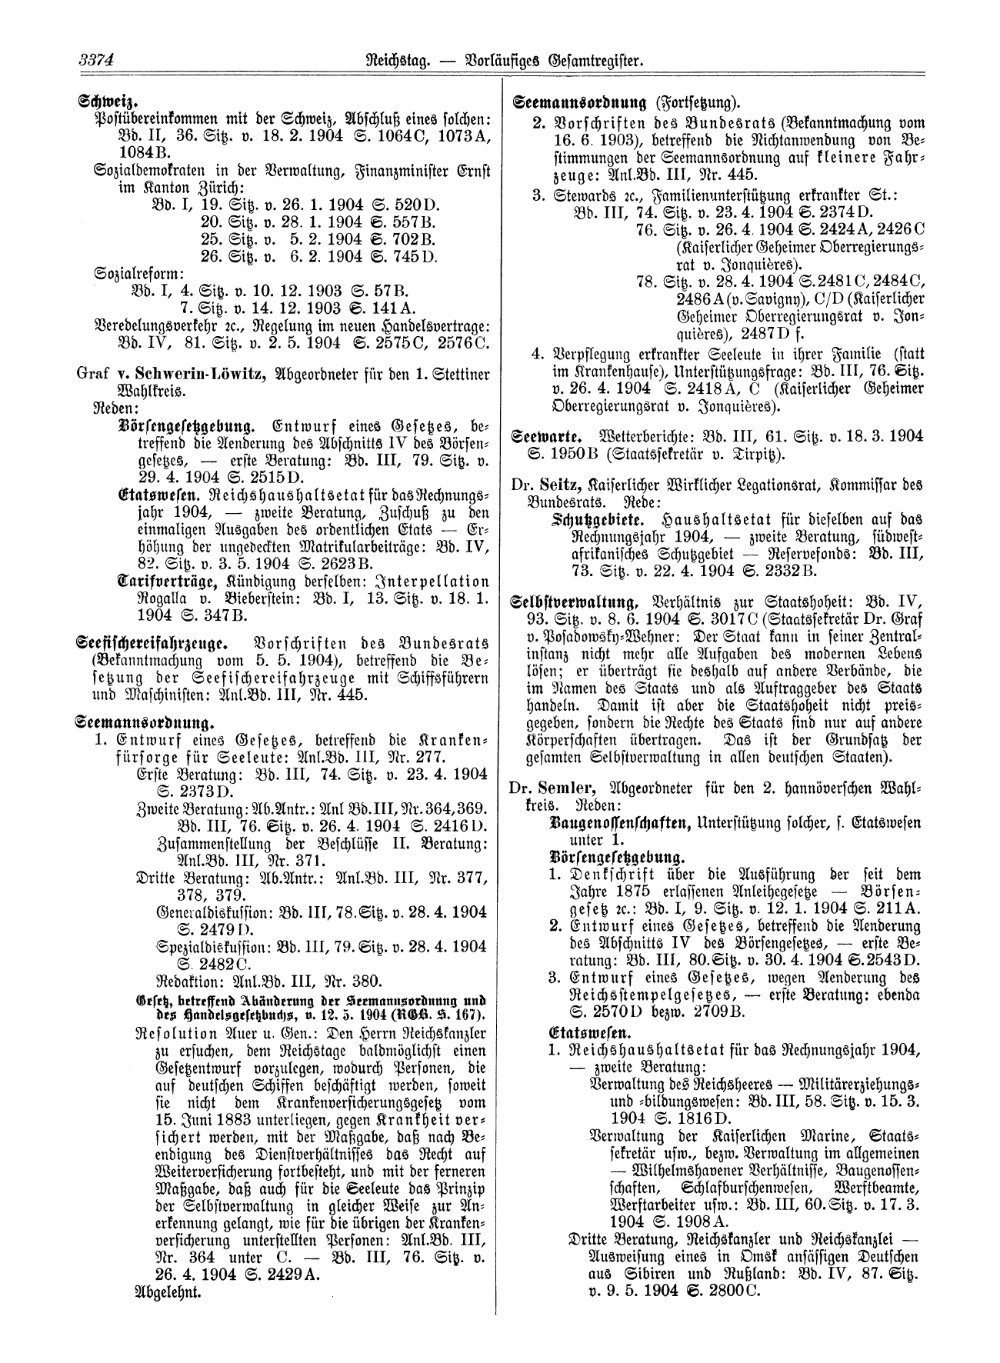 Scan of page 3374